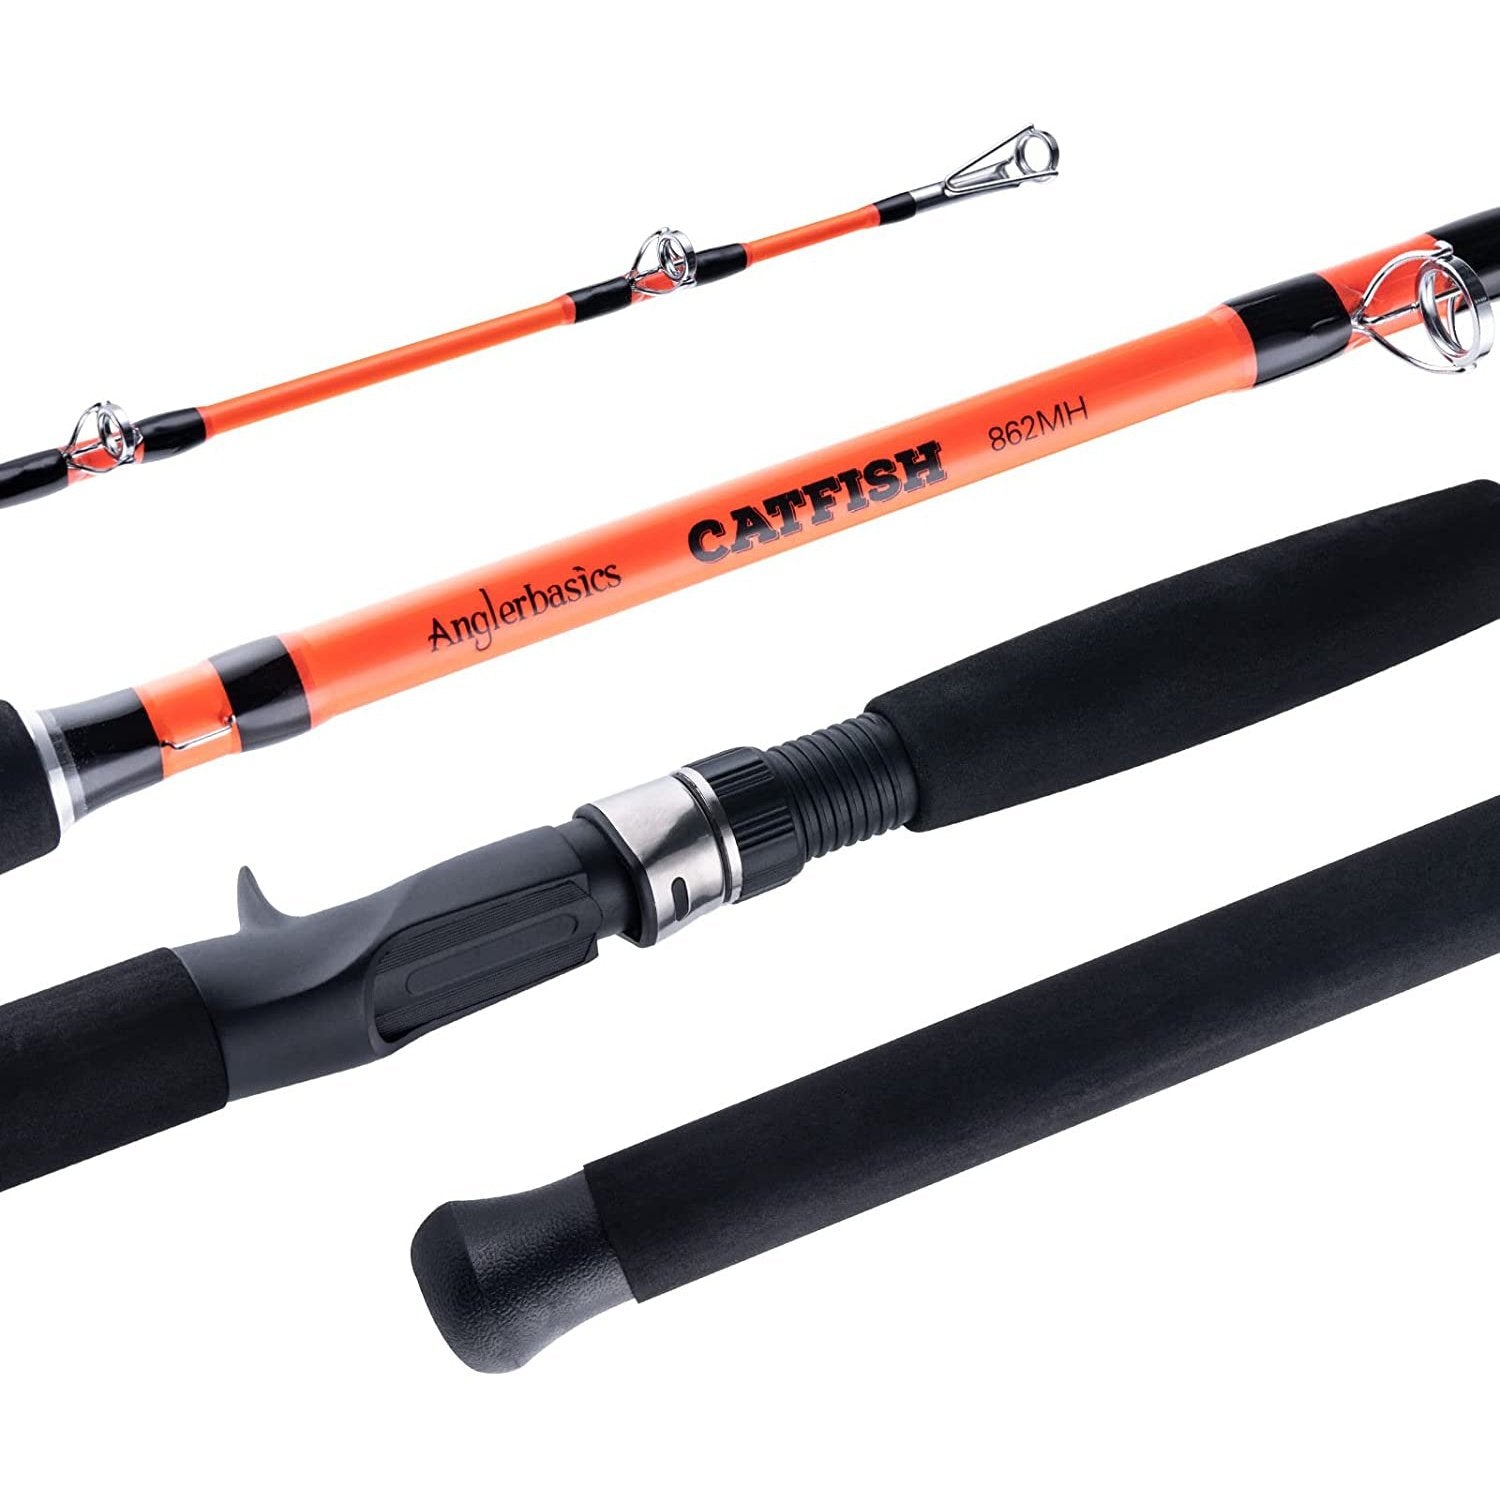 Goture Spinning Fishing Rods - Travel Spinning Rods - Portable 4